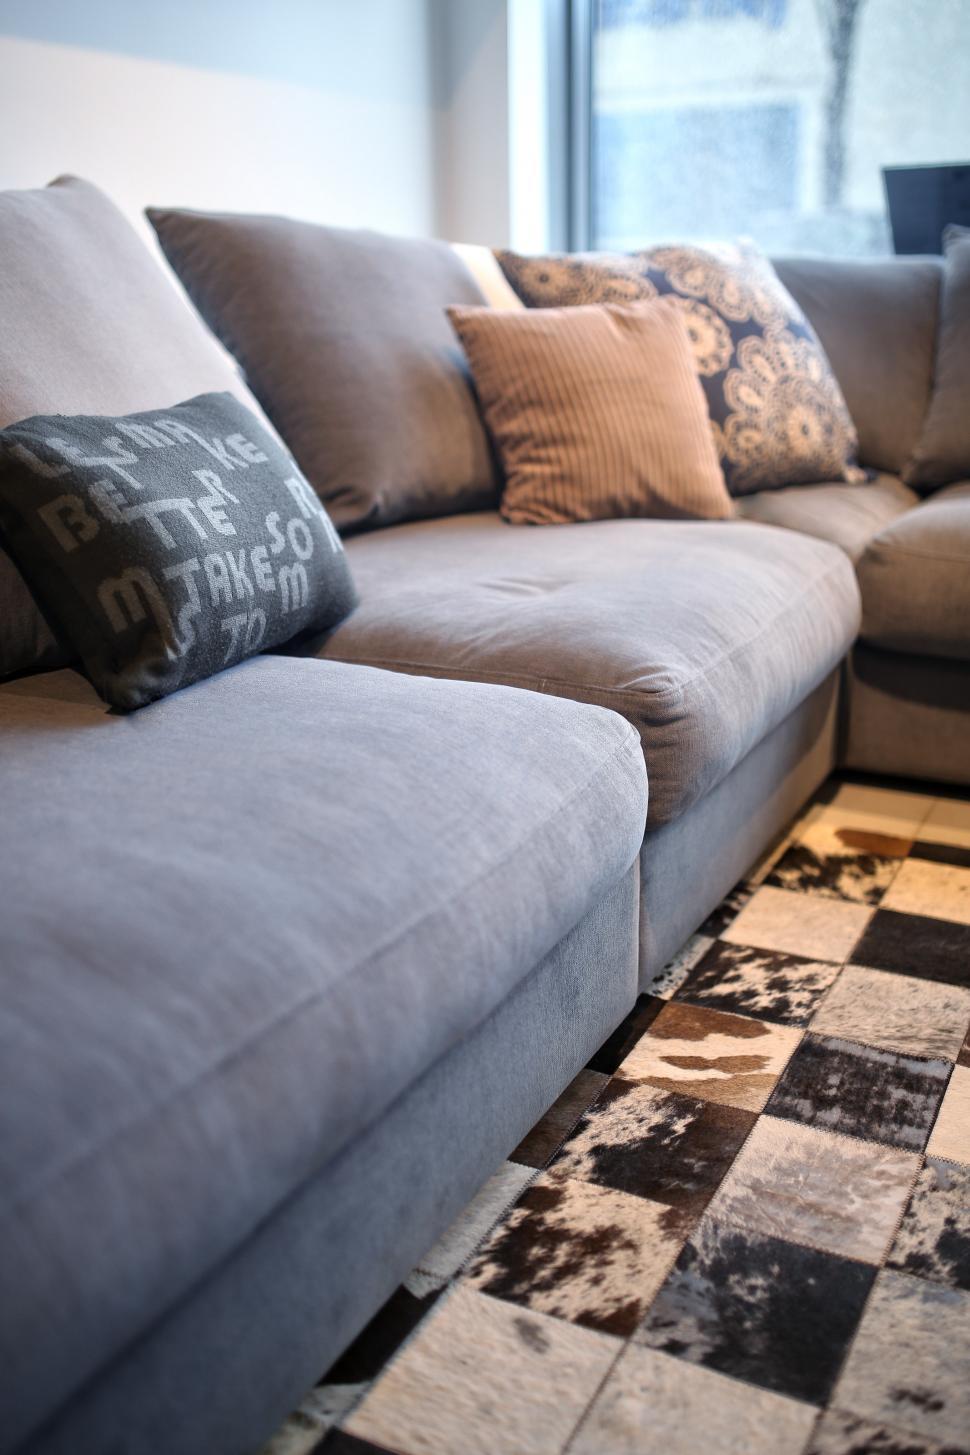 Free Image of Living Room With Couch and Checkered Rug 